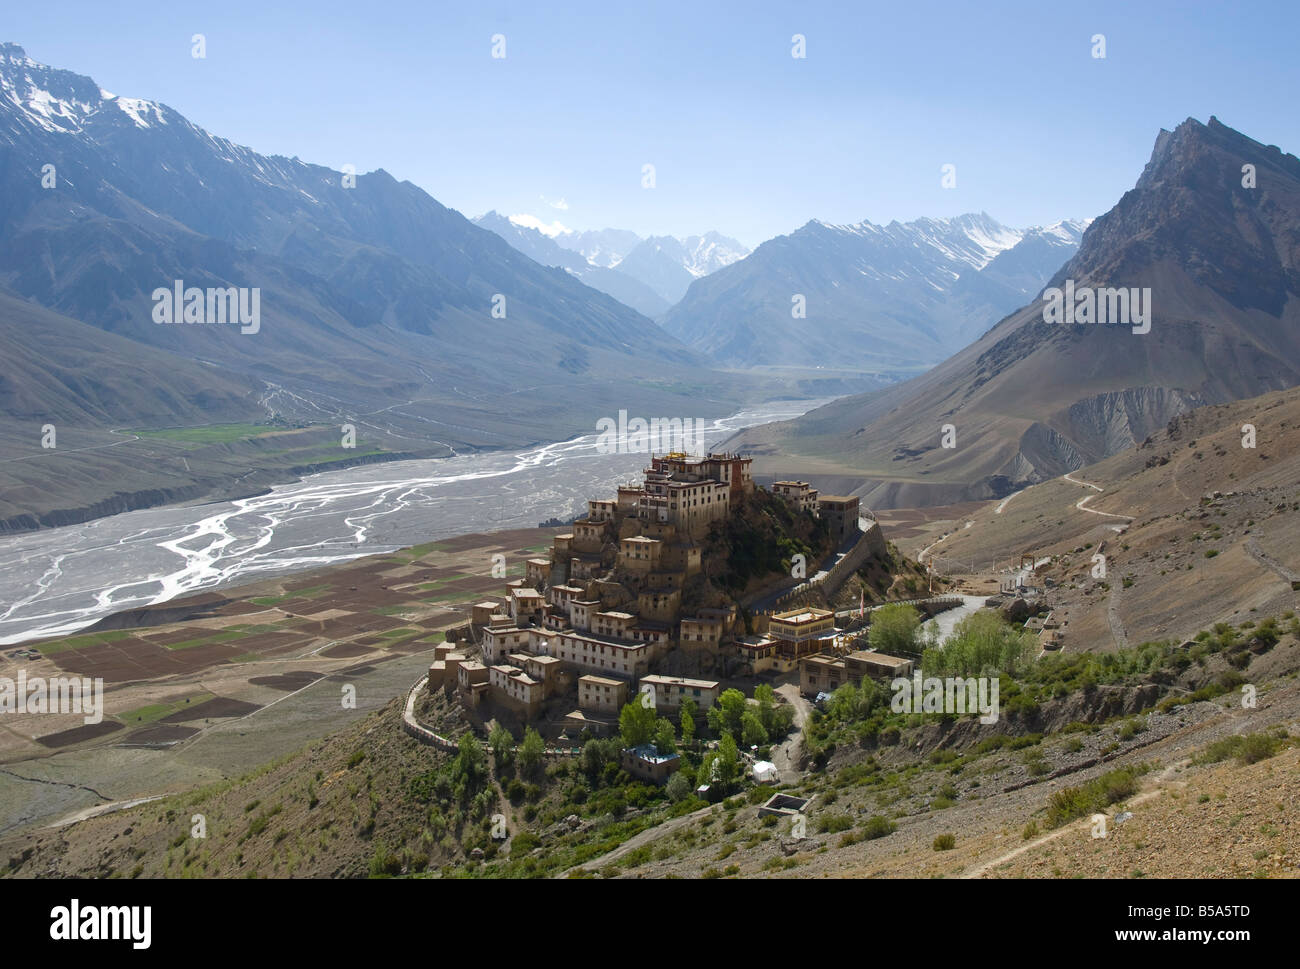 View of Kee Gompa monastery, with Spiti valley and snowy mountains, Spiti, Himachal Pradesh, India Stock Photo